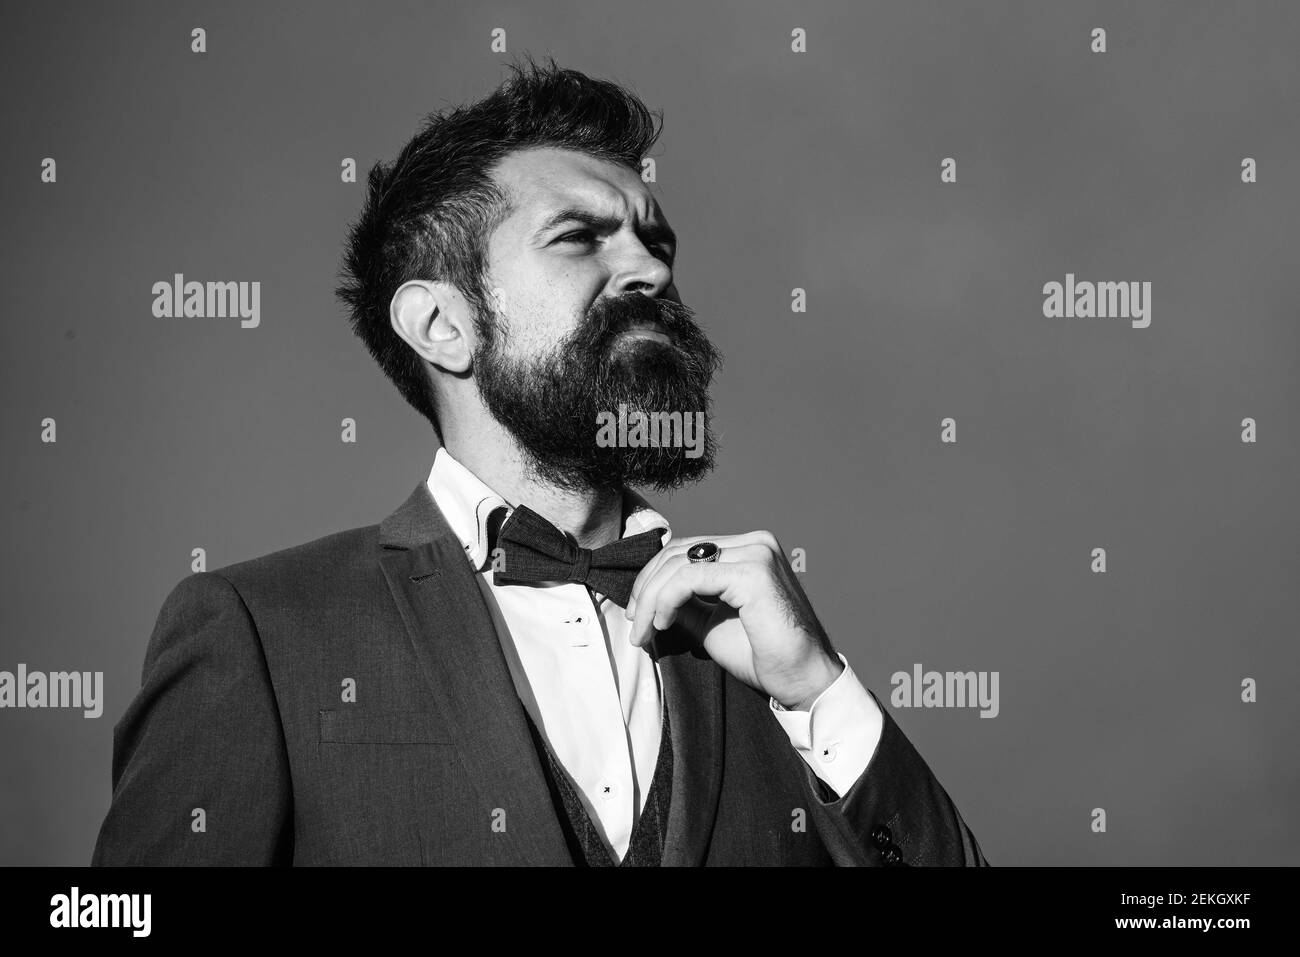 Man with beard and mustache. Hipster with stylish appearance. Guy with thoughtful face in luxury classic suit touches bow tie. Stock Photo